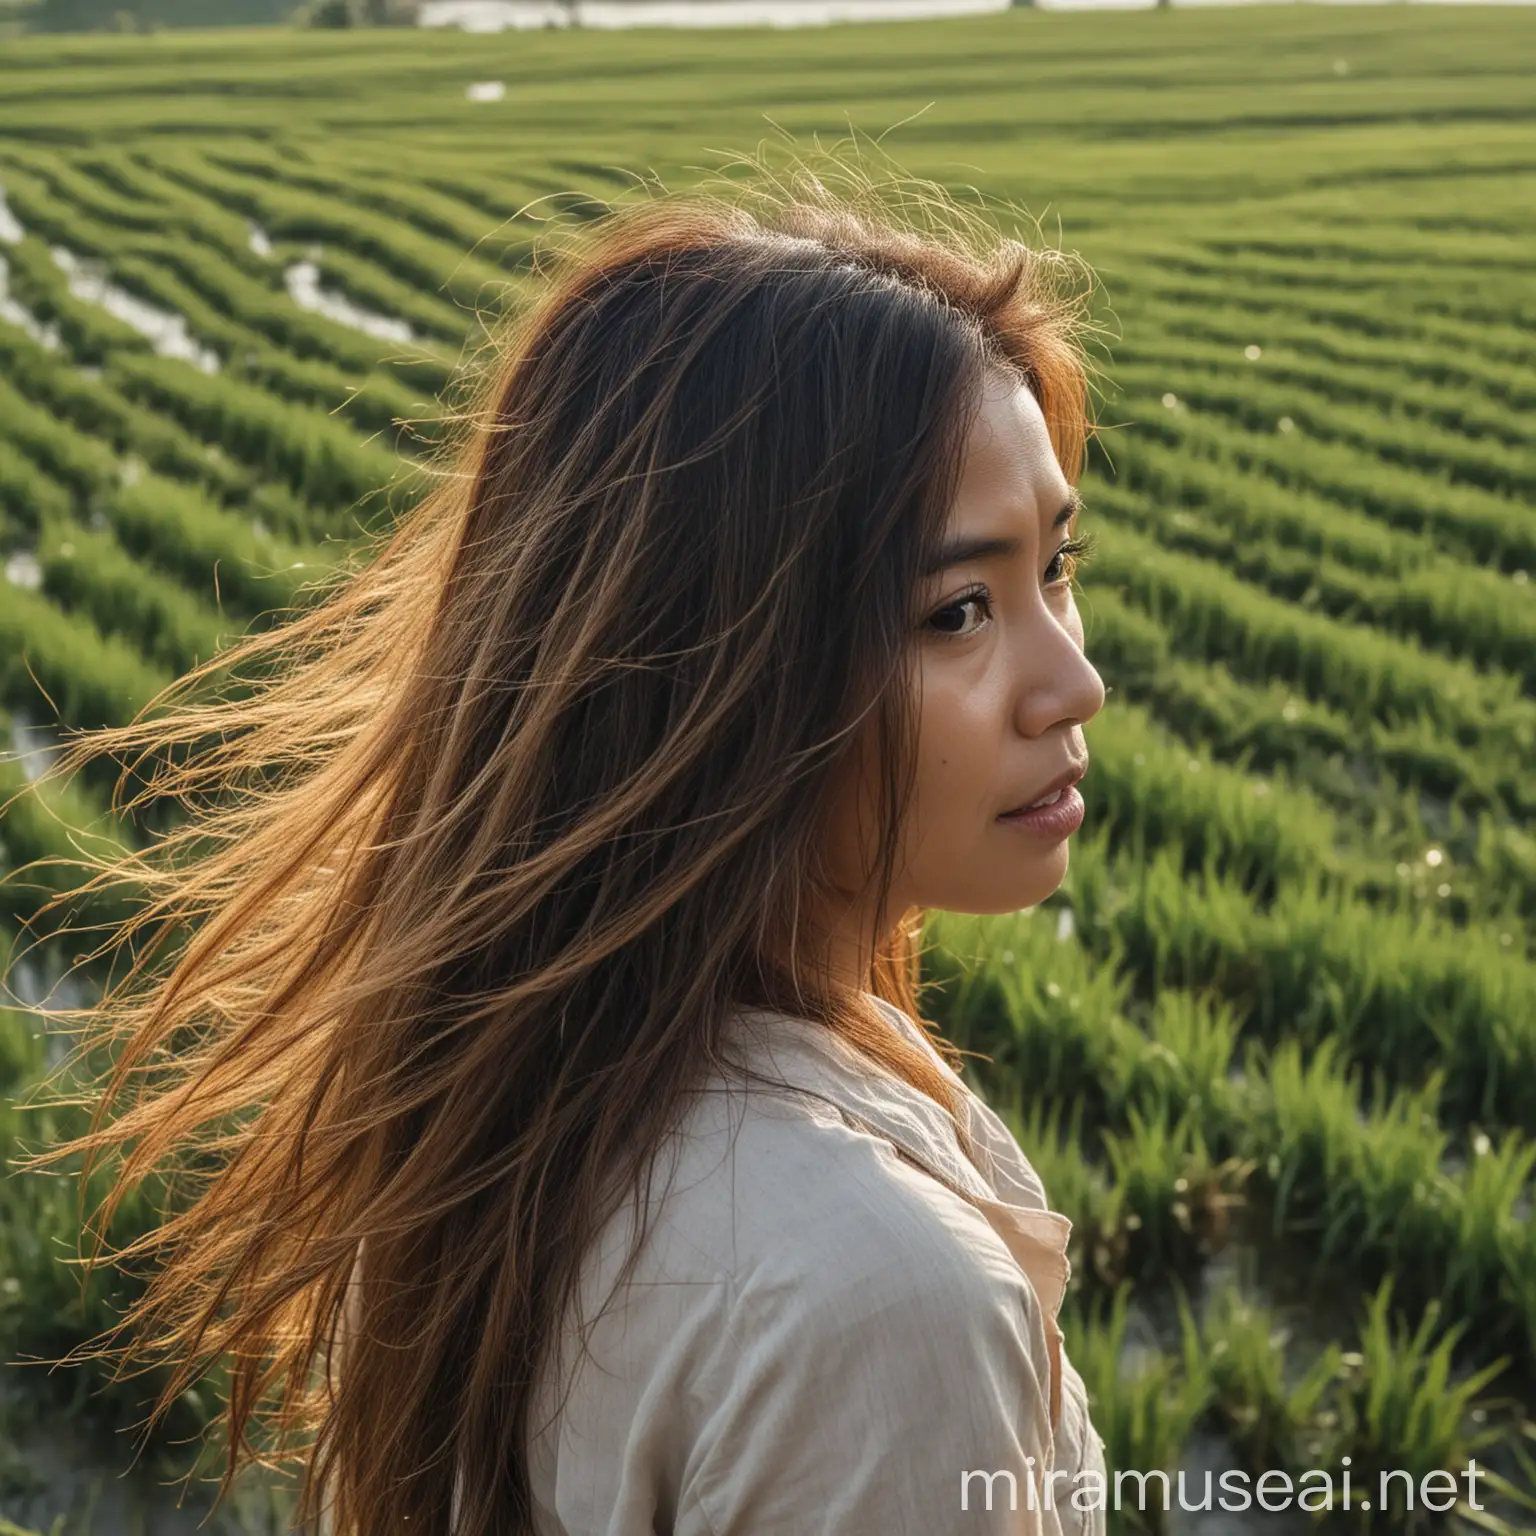 A woman in her 40s from Indonesia with long disheveled hair appears to be looking at the rice fields